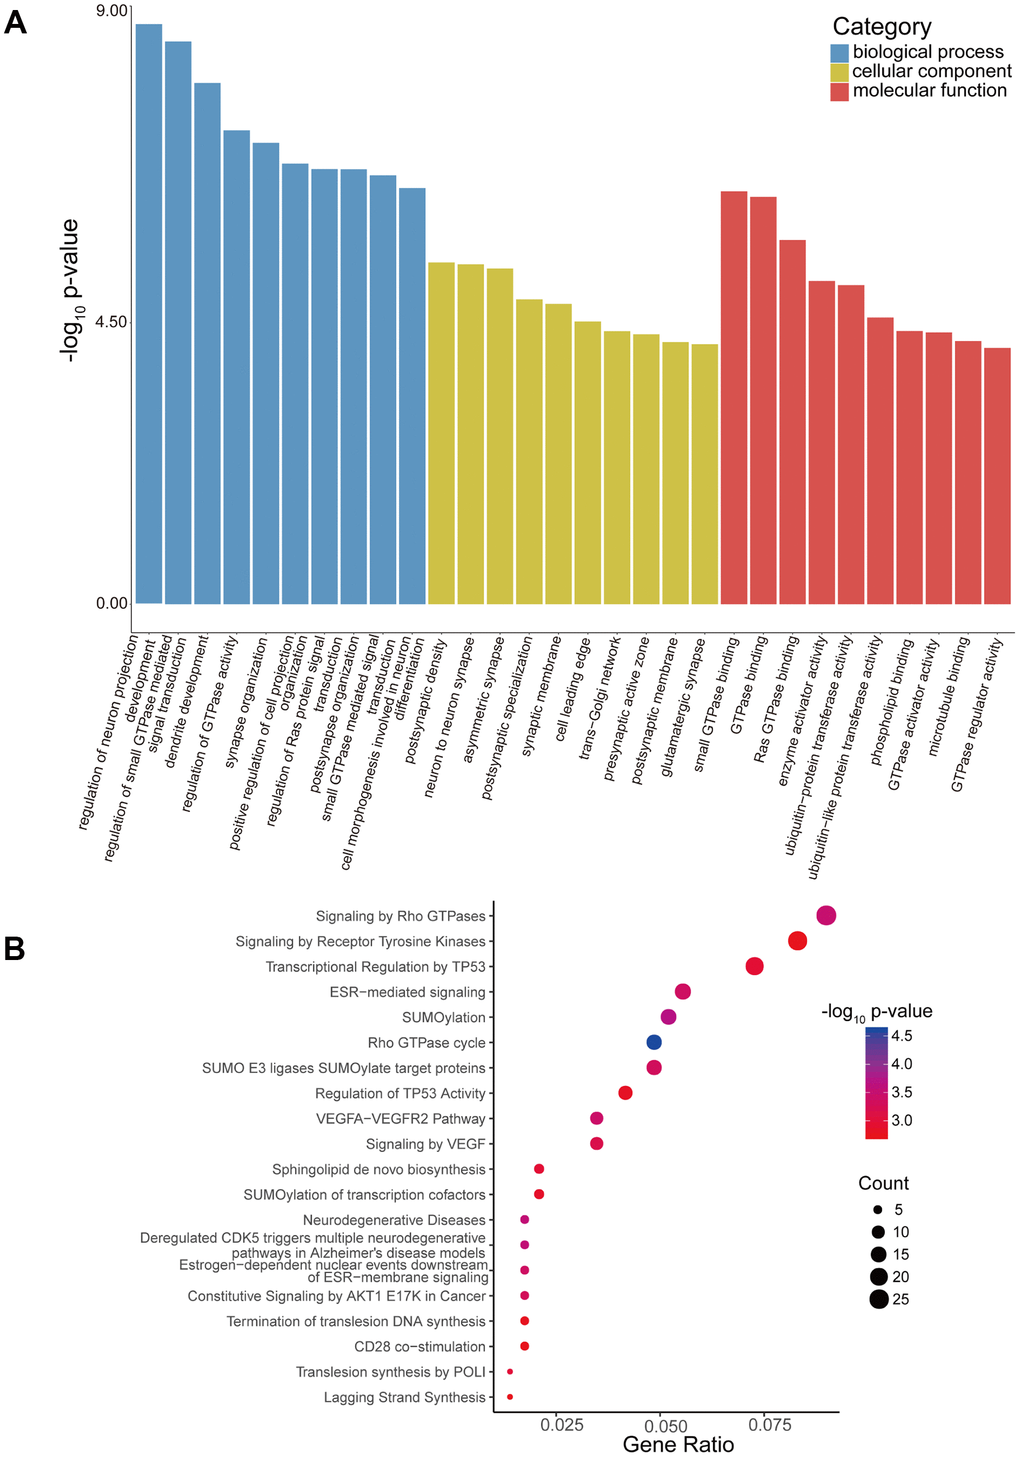 GO enrichment and Reactome pathway analyses of host genes of differentially expressed circRNAs. (A) GO enrichment analysis of host genes for circRNAs with differential expression. The ten most enriched GO terms in the MF, BP, and CC categories for the host genes. (B) Bubble map of Reactome pathway analysis of the top 20 predominant pathways. The X-axis denotes the enriched differential gene ratio in each pathway. The Y-axis represents the name of the significantly enriched pathway. The p-values are expressed by variations from red to blue. A deeper blue color indicates a greater significant difference.